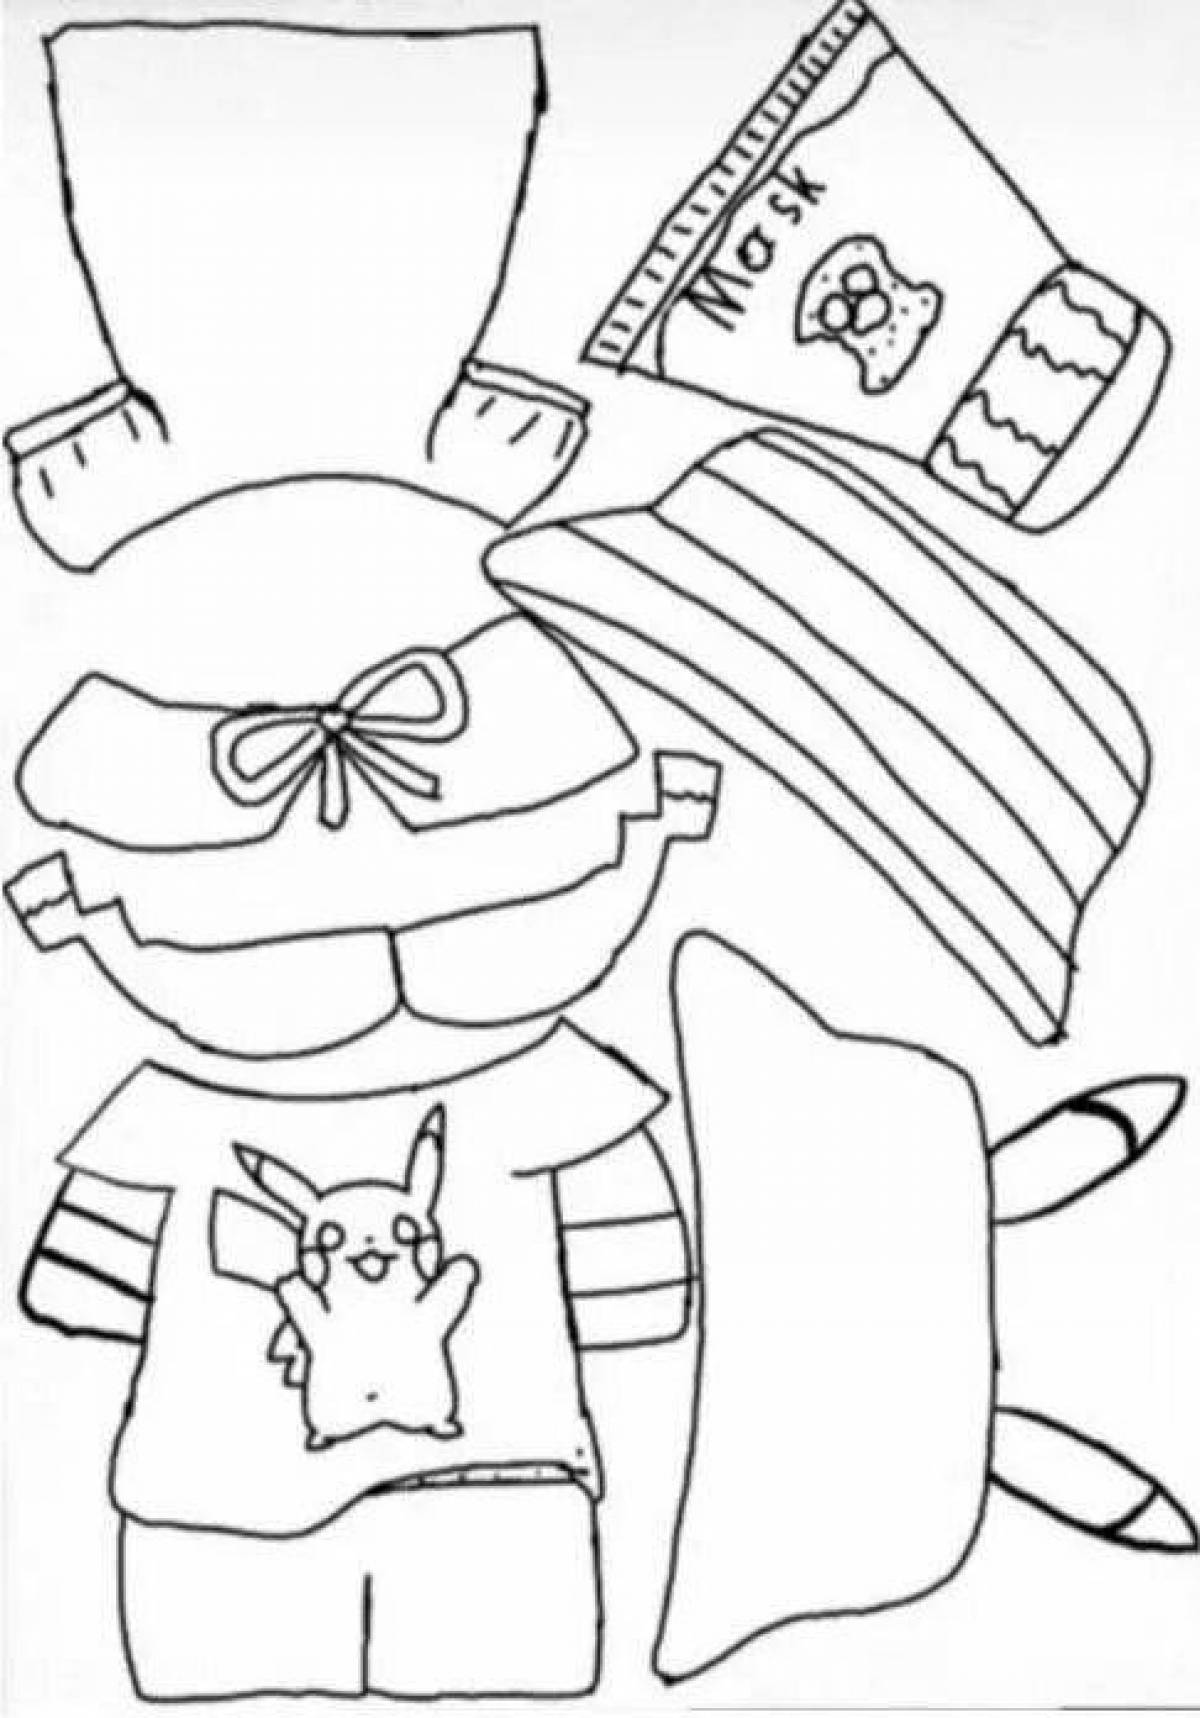 Coloring book bright duck in clothes